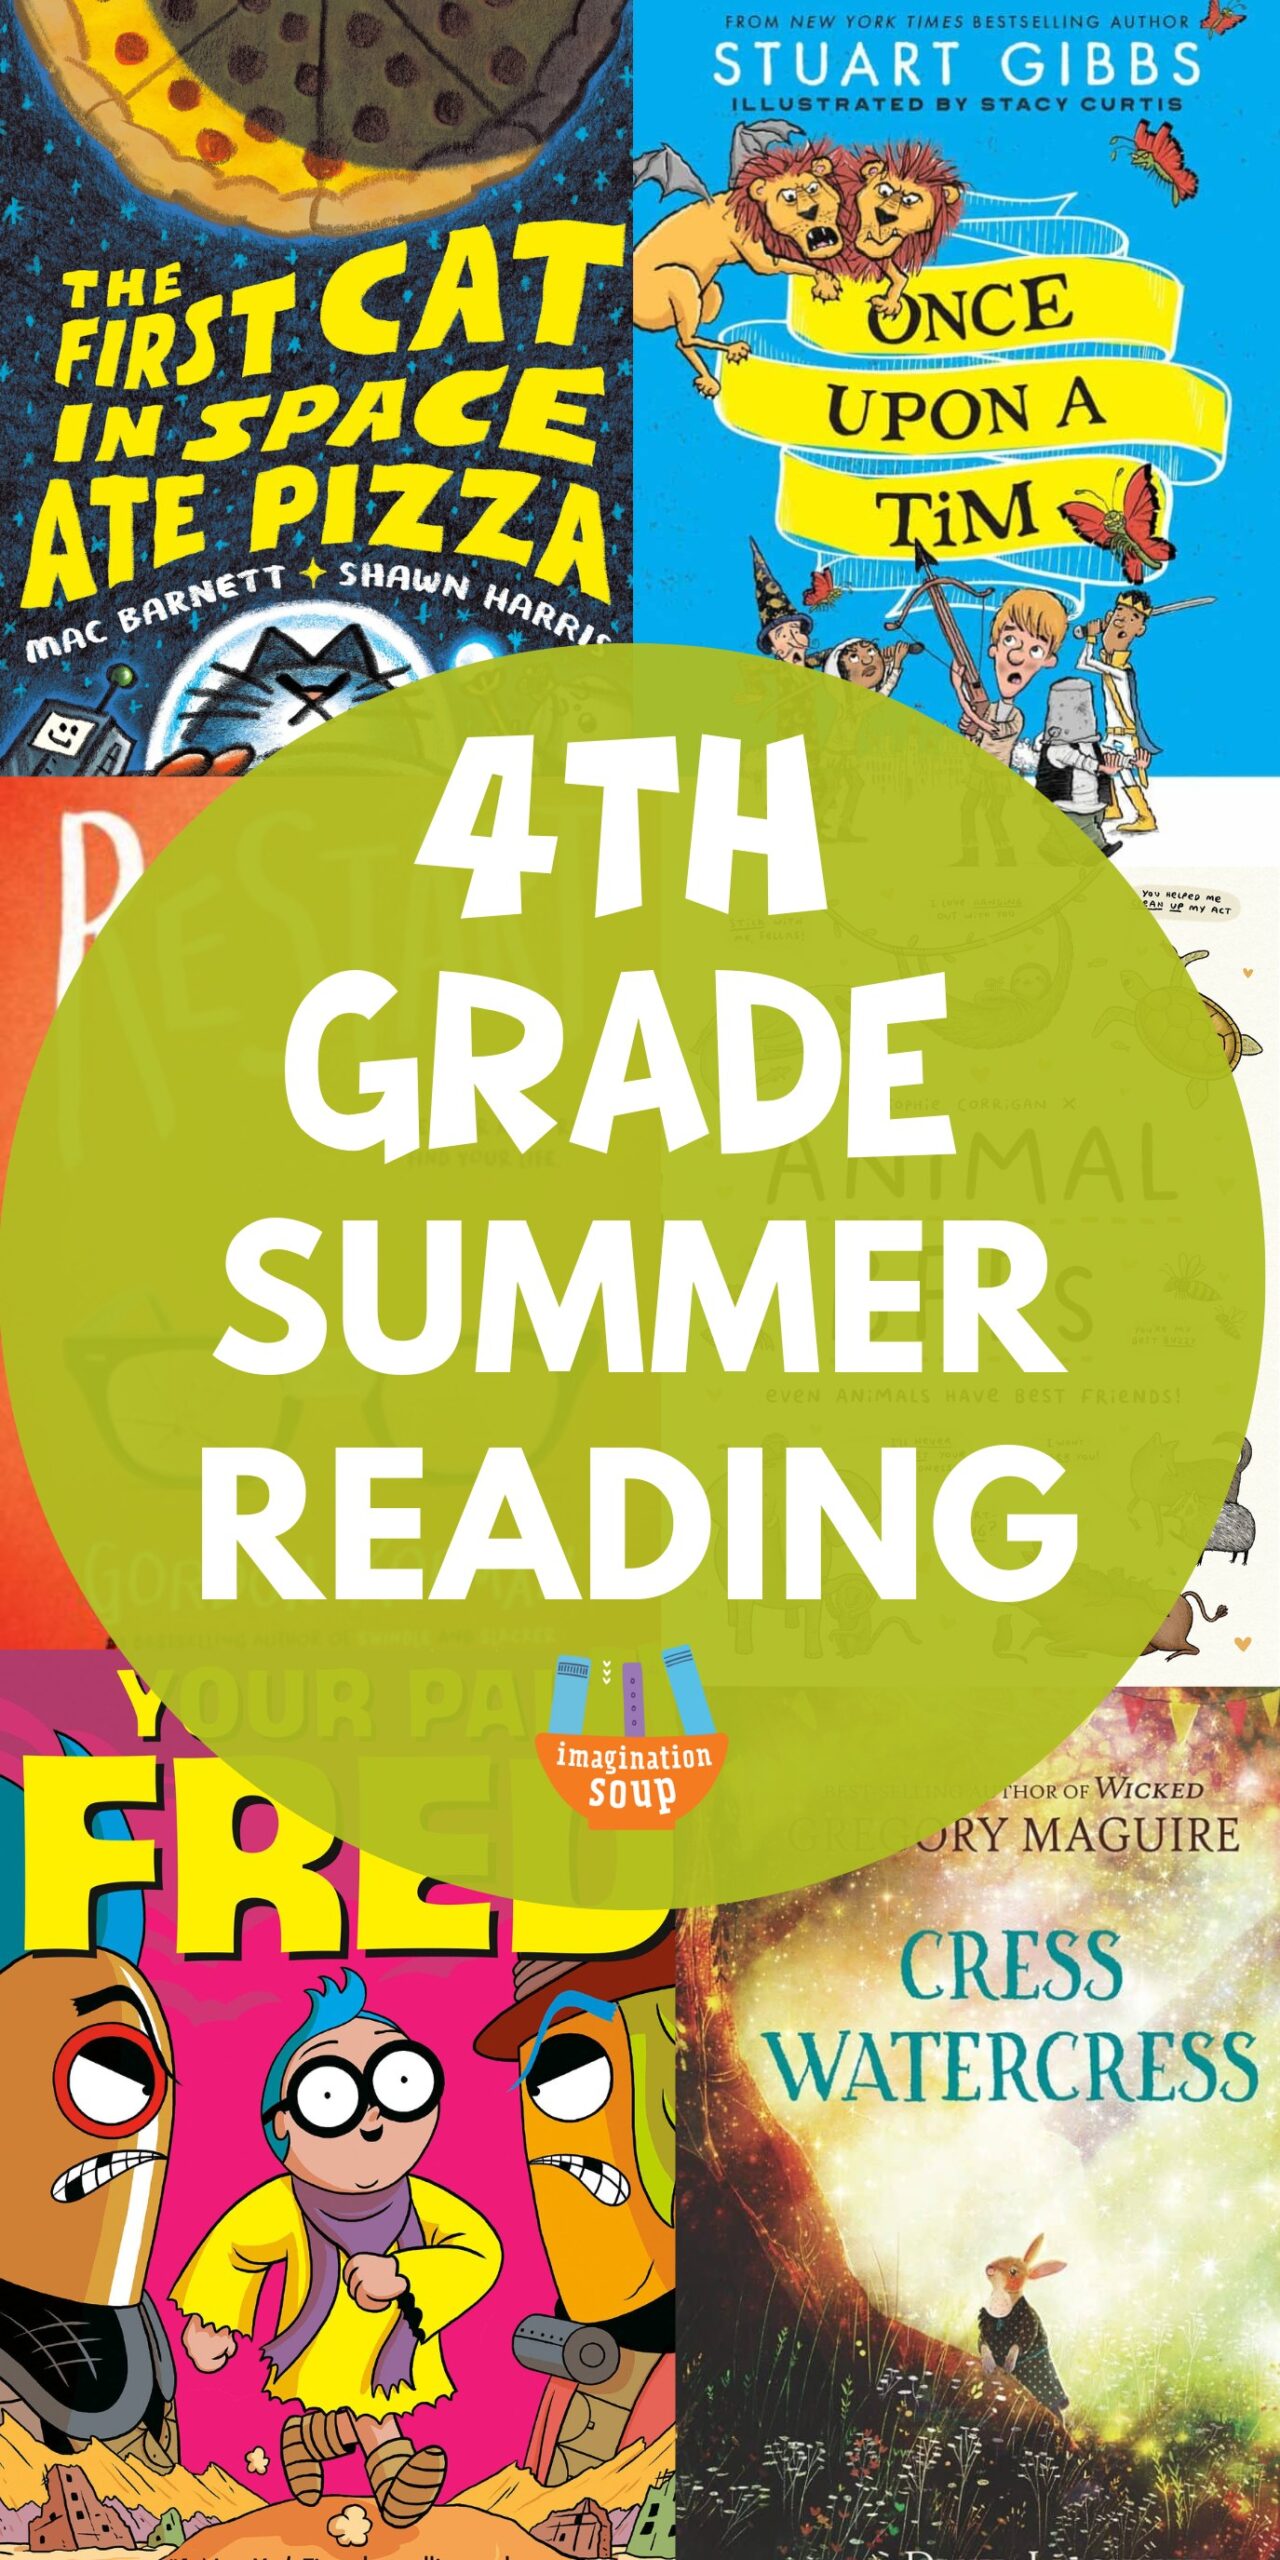 Get ready for summer with amazing 4th grade books to read all summer long! This reading list will give you and your young readers plenty of choices from which to pick; the best chapter books to hook your soon-to-be 4th graders on reading.